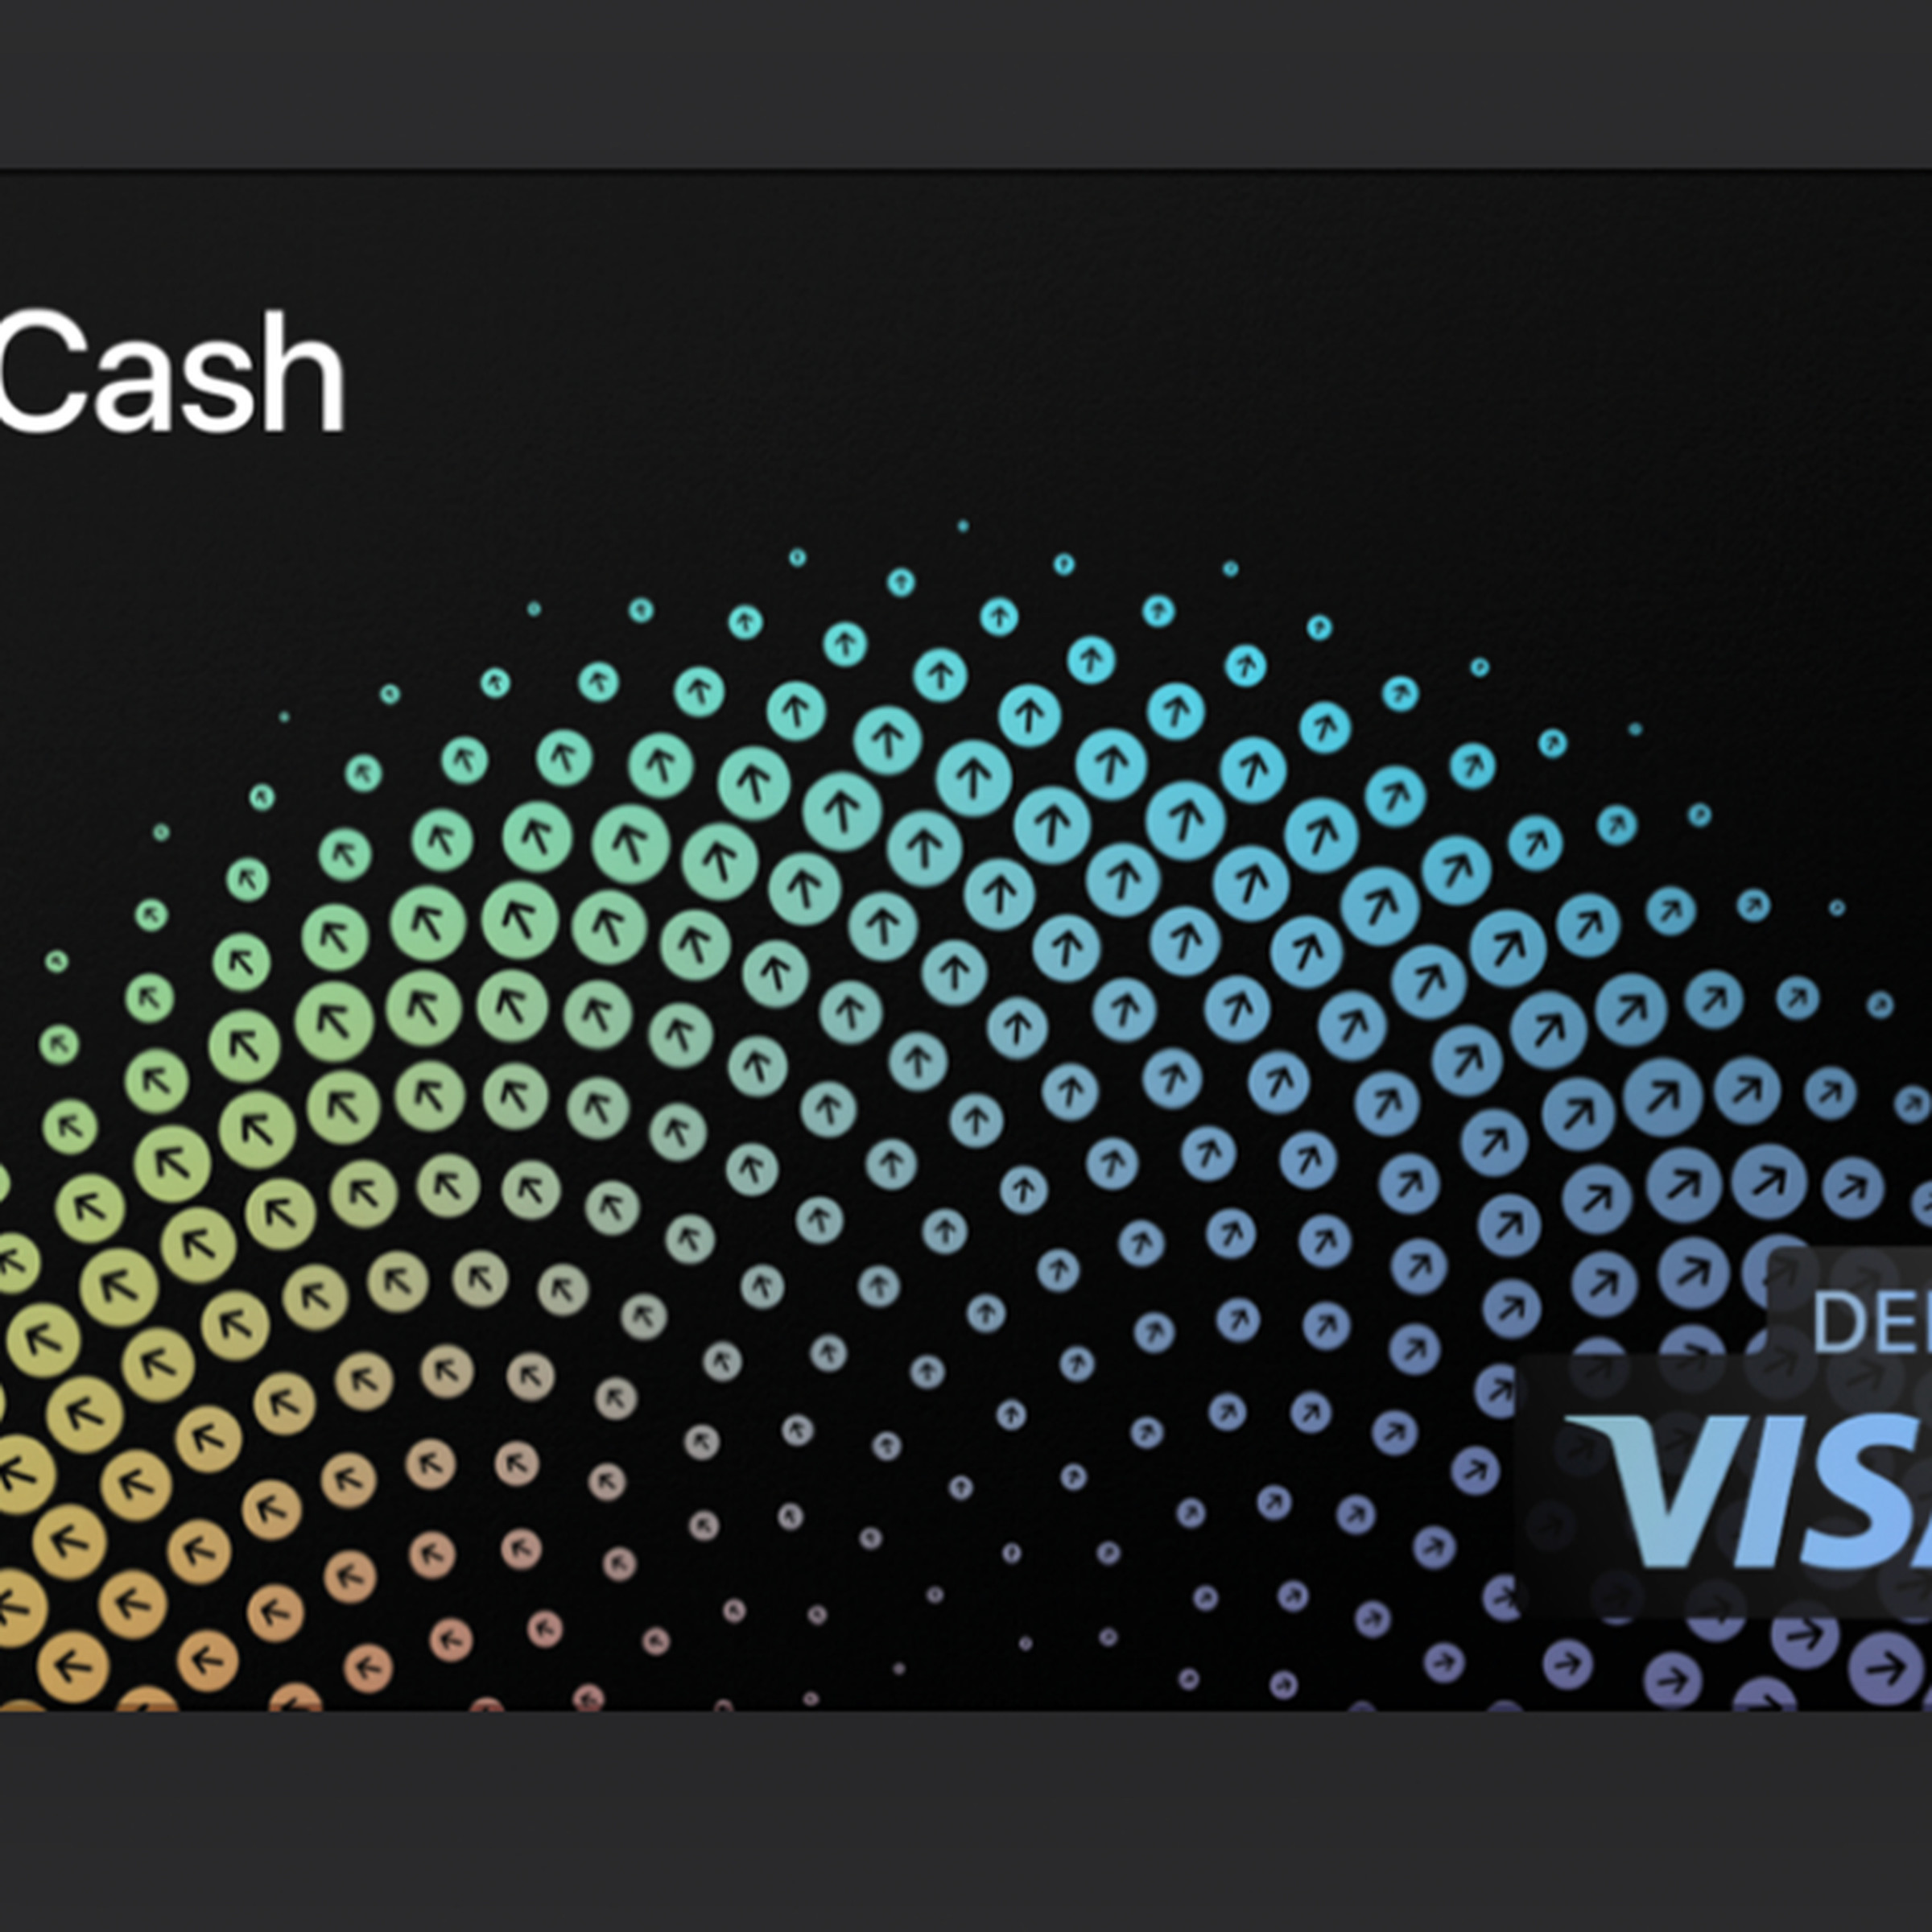 A picture of the Apple Cash card, except it has a Visa logo in the bottom right corner.